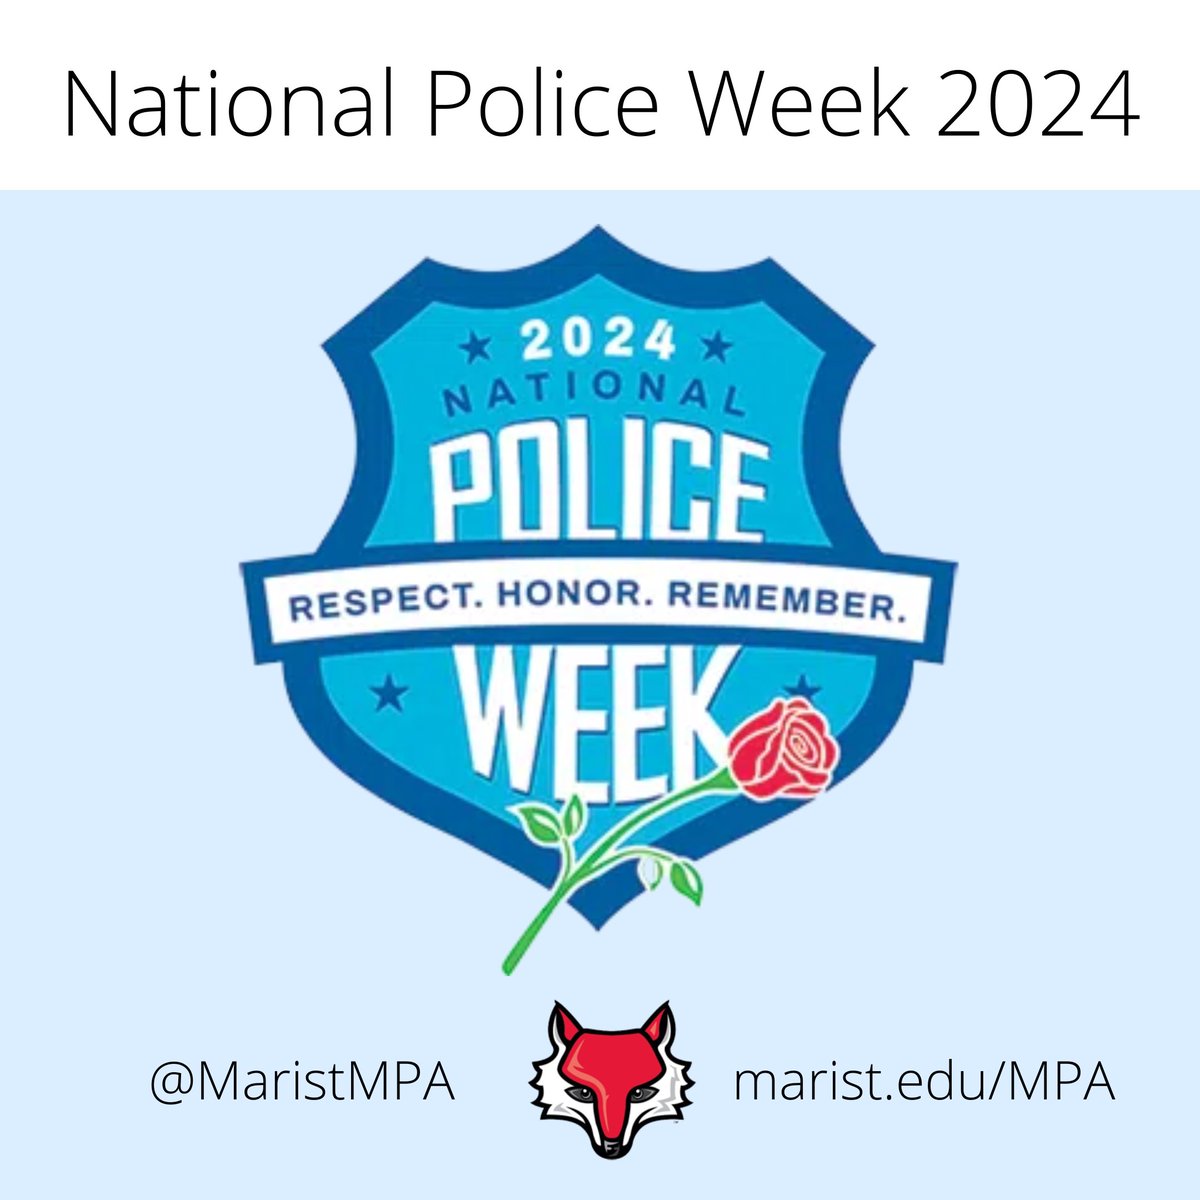 The Marist MPA program recognizes our many students and alumni who serve in sworn law enforcement positions for National Police Week 2024. Their work is essential in keeping our communities safe. #NationalPoliceWeek2024